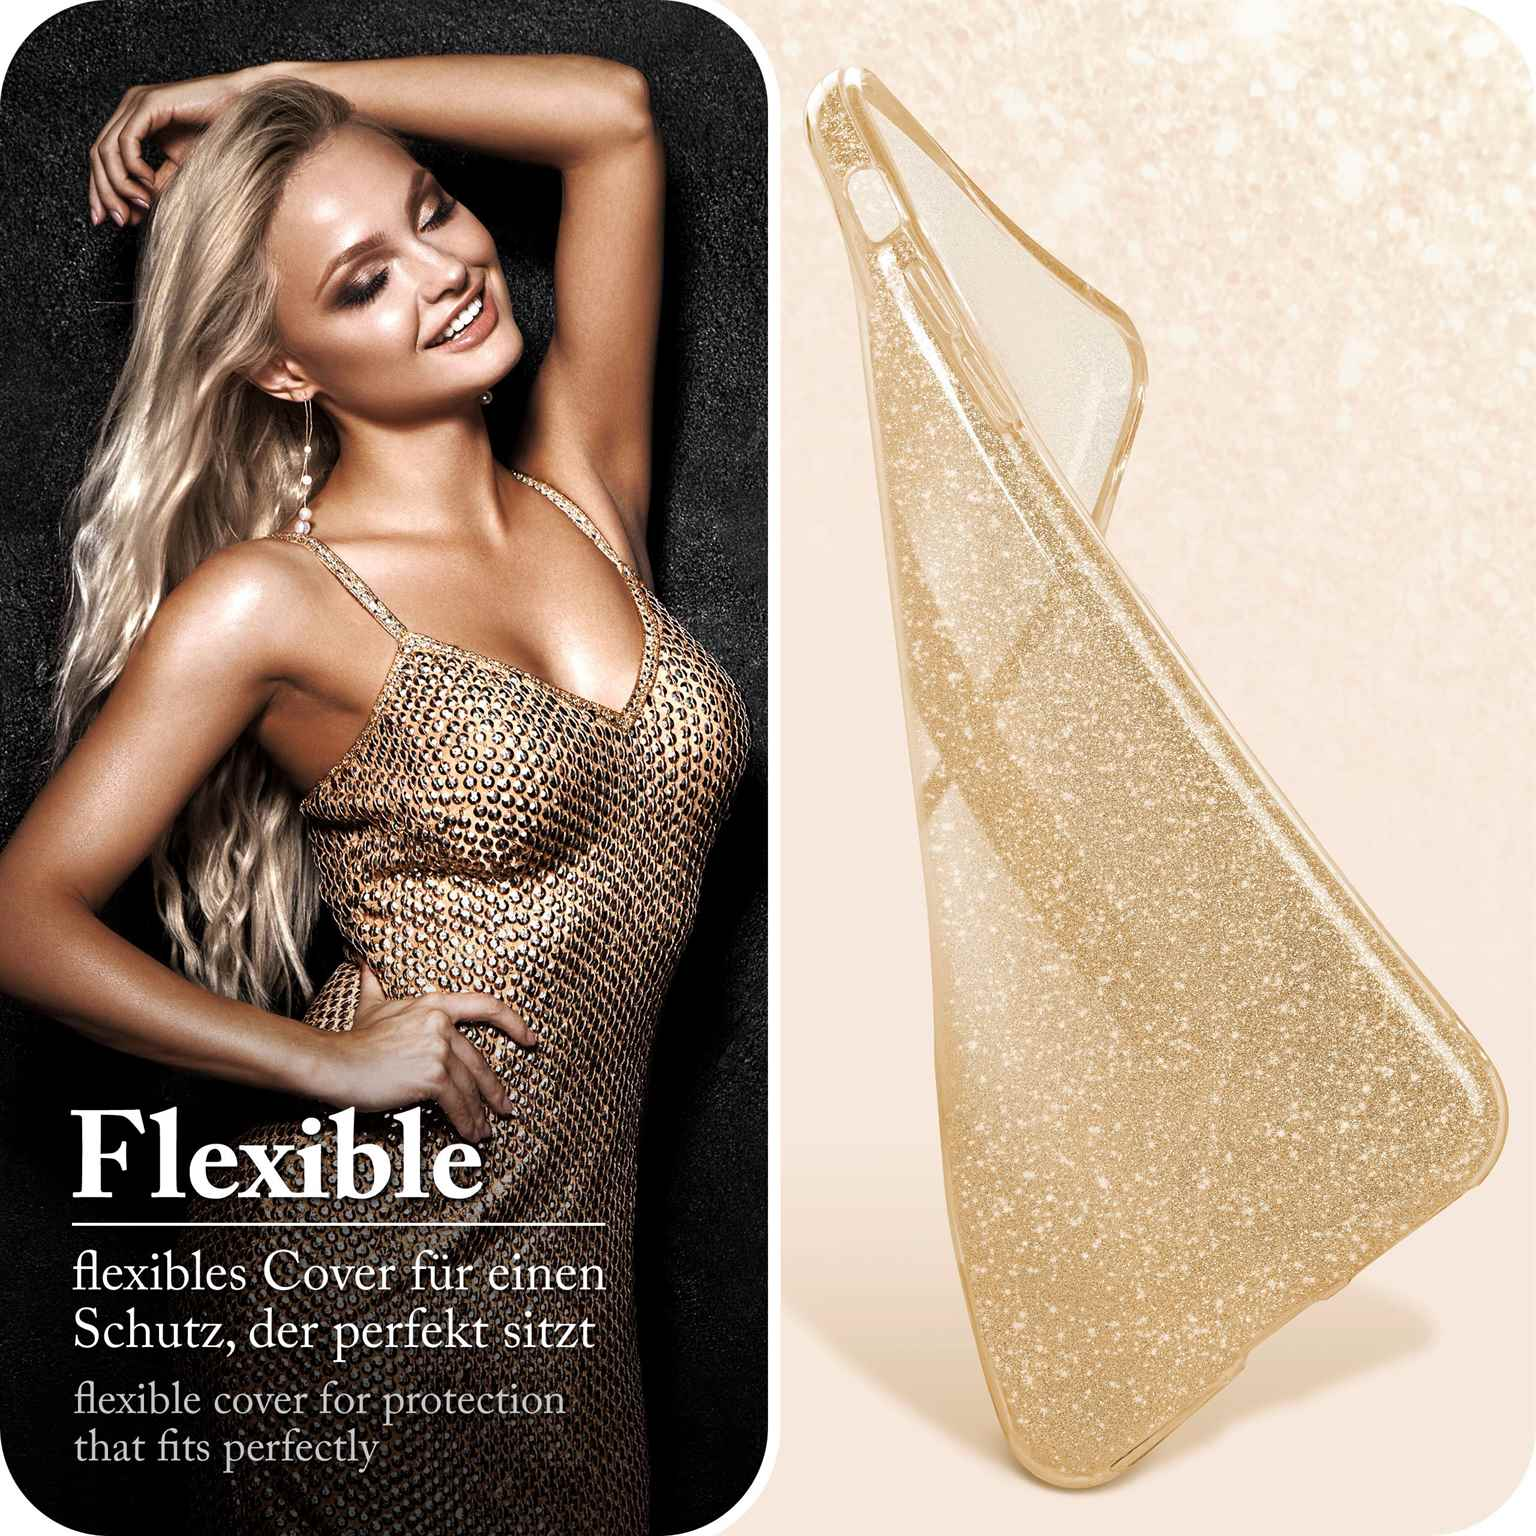 Shine Max, Backcover, Pro Apple, ONEFLOW 11 Case, Glitter iPhone Gold -